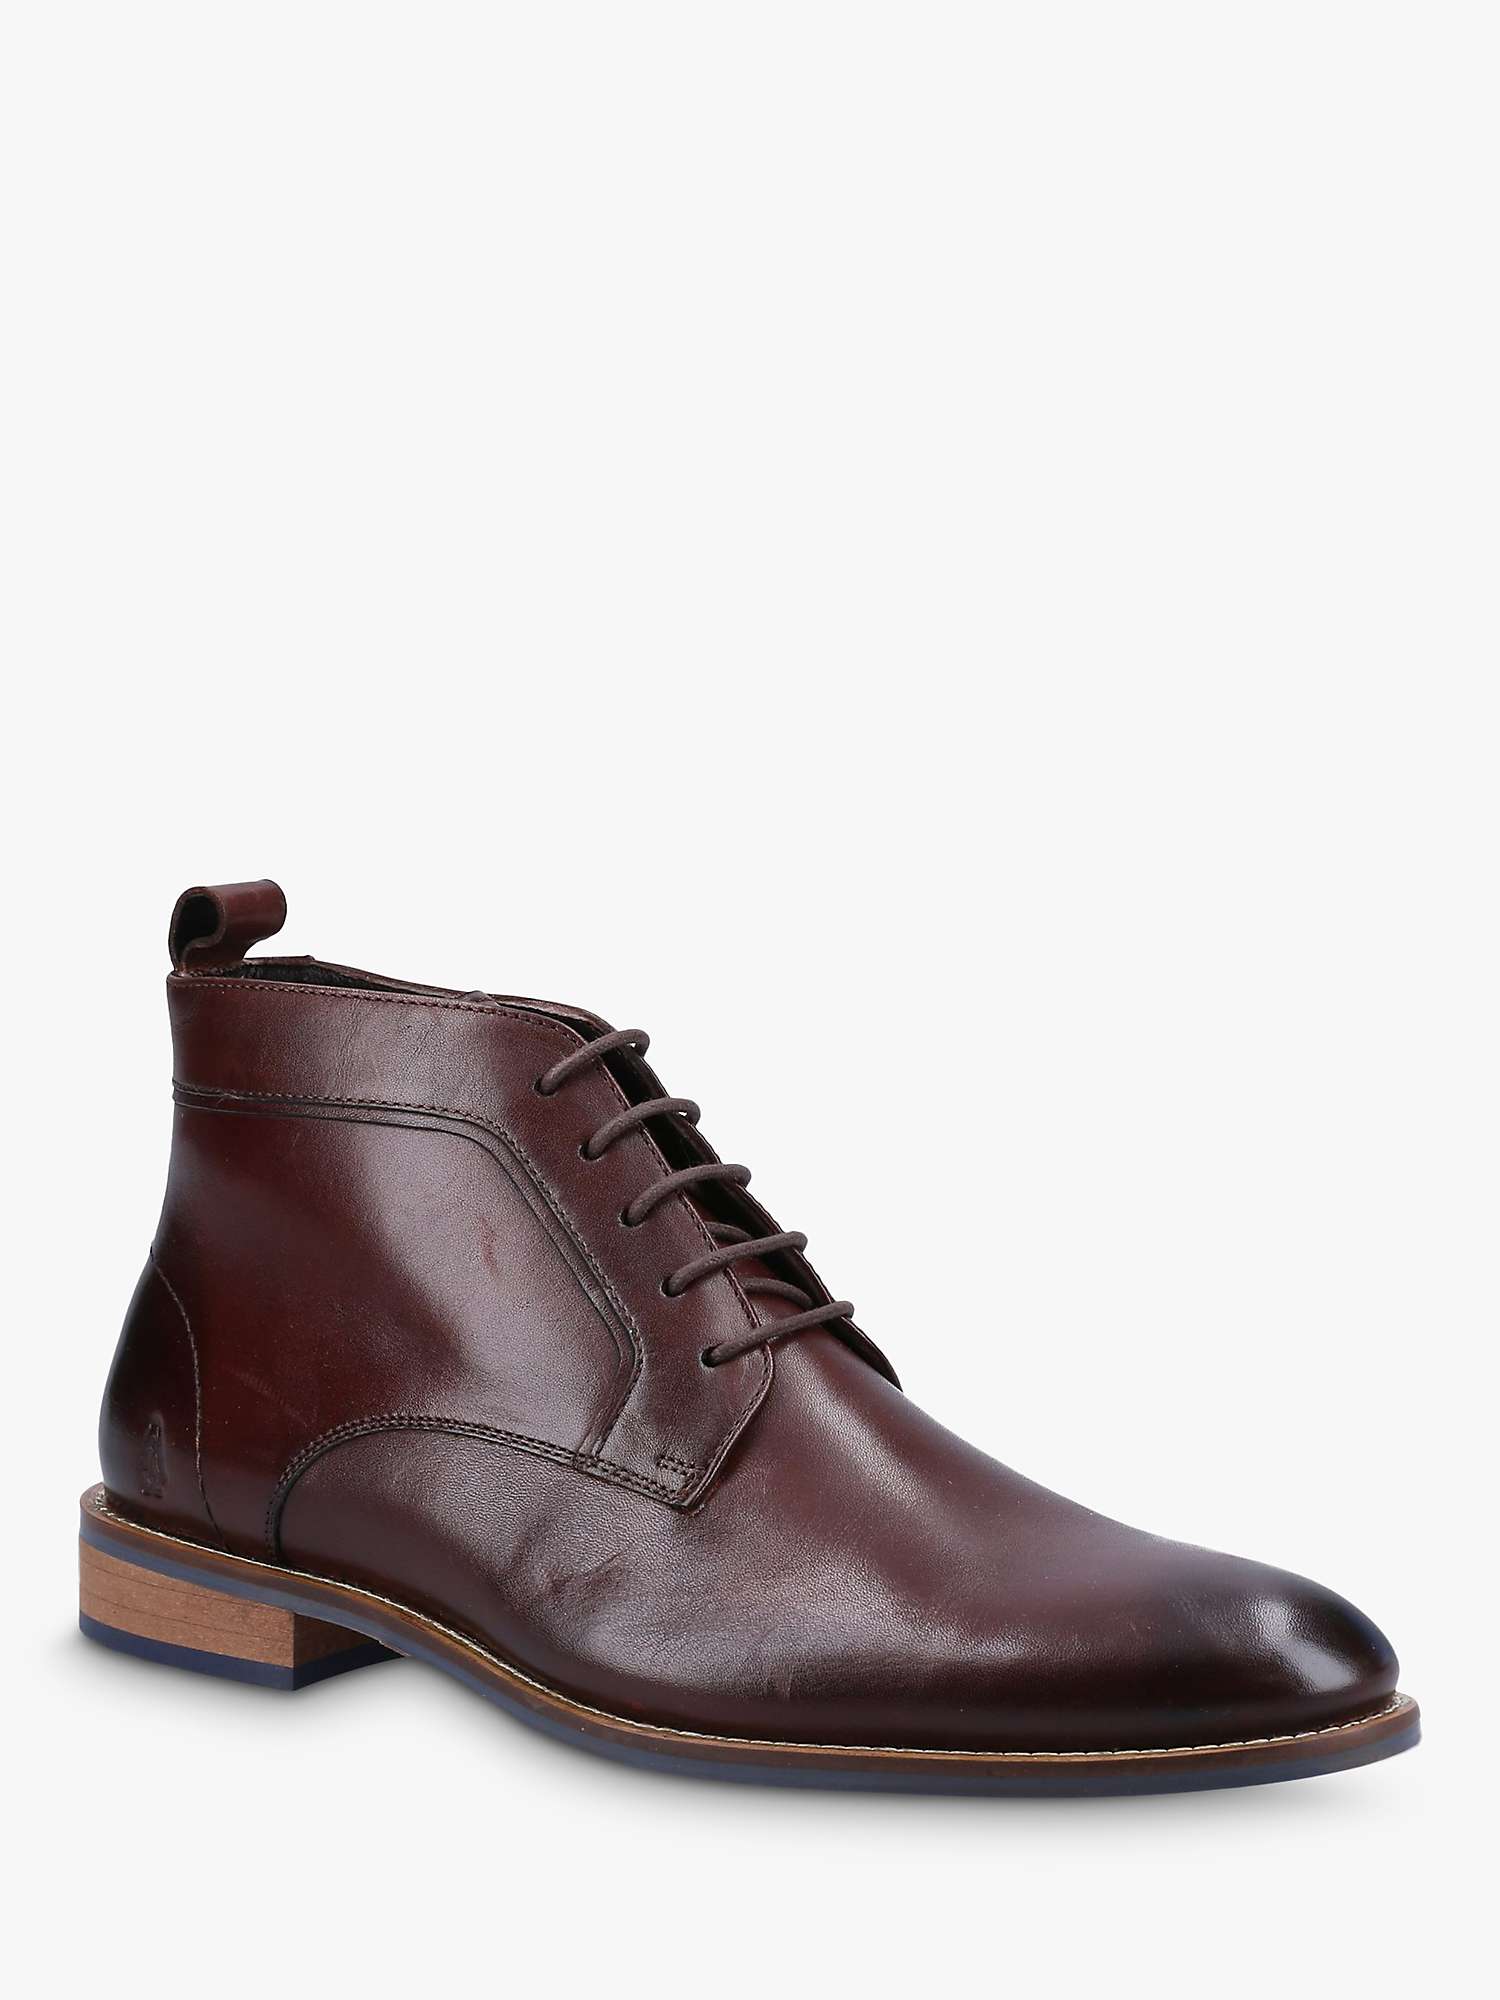 Hush Puppies Declan Leather Lace Up Ankle Boots, Brown at John Lewis ...